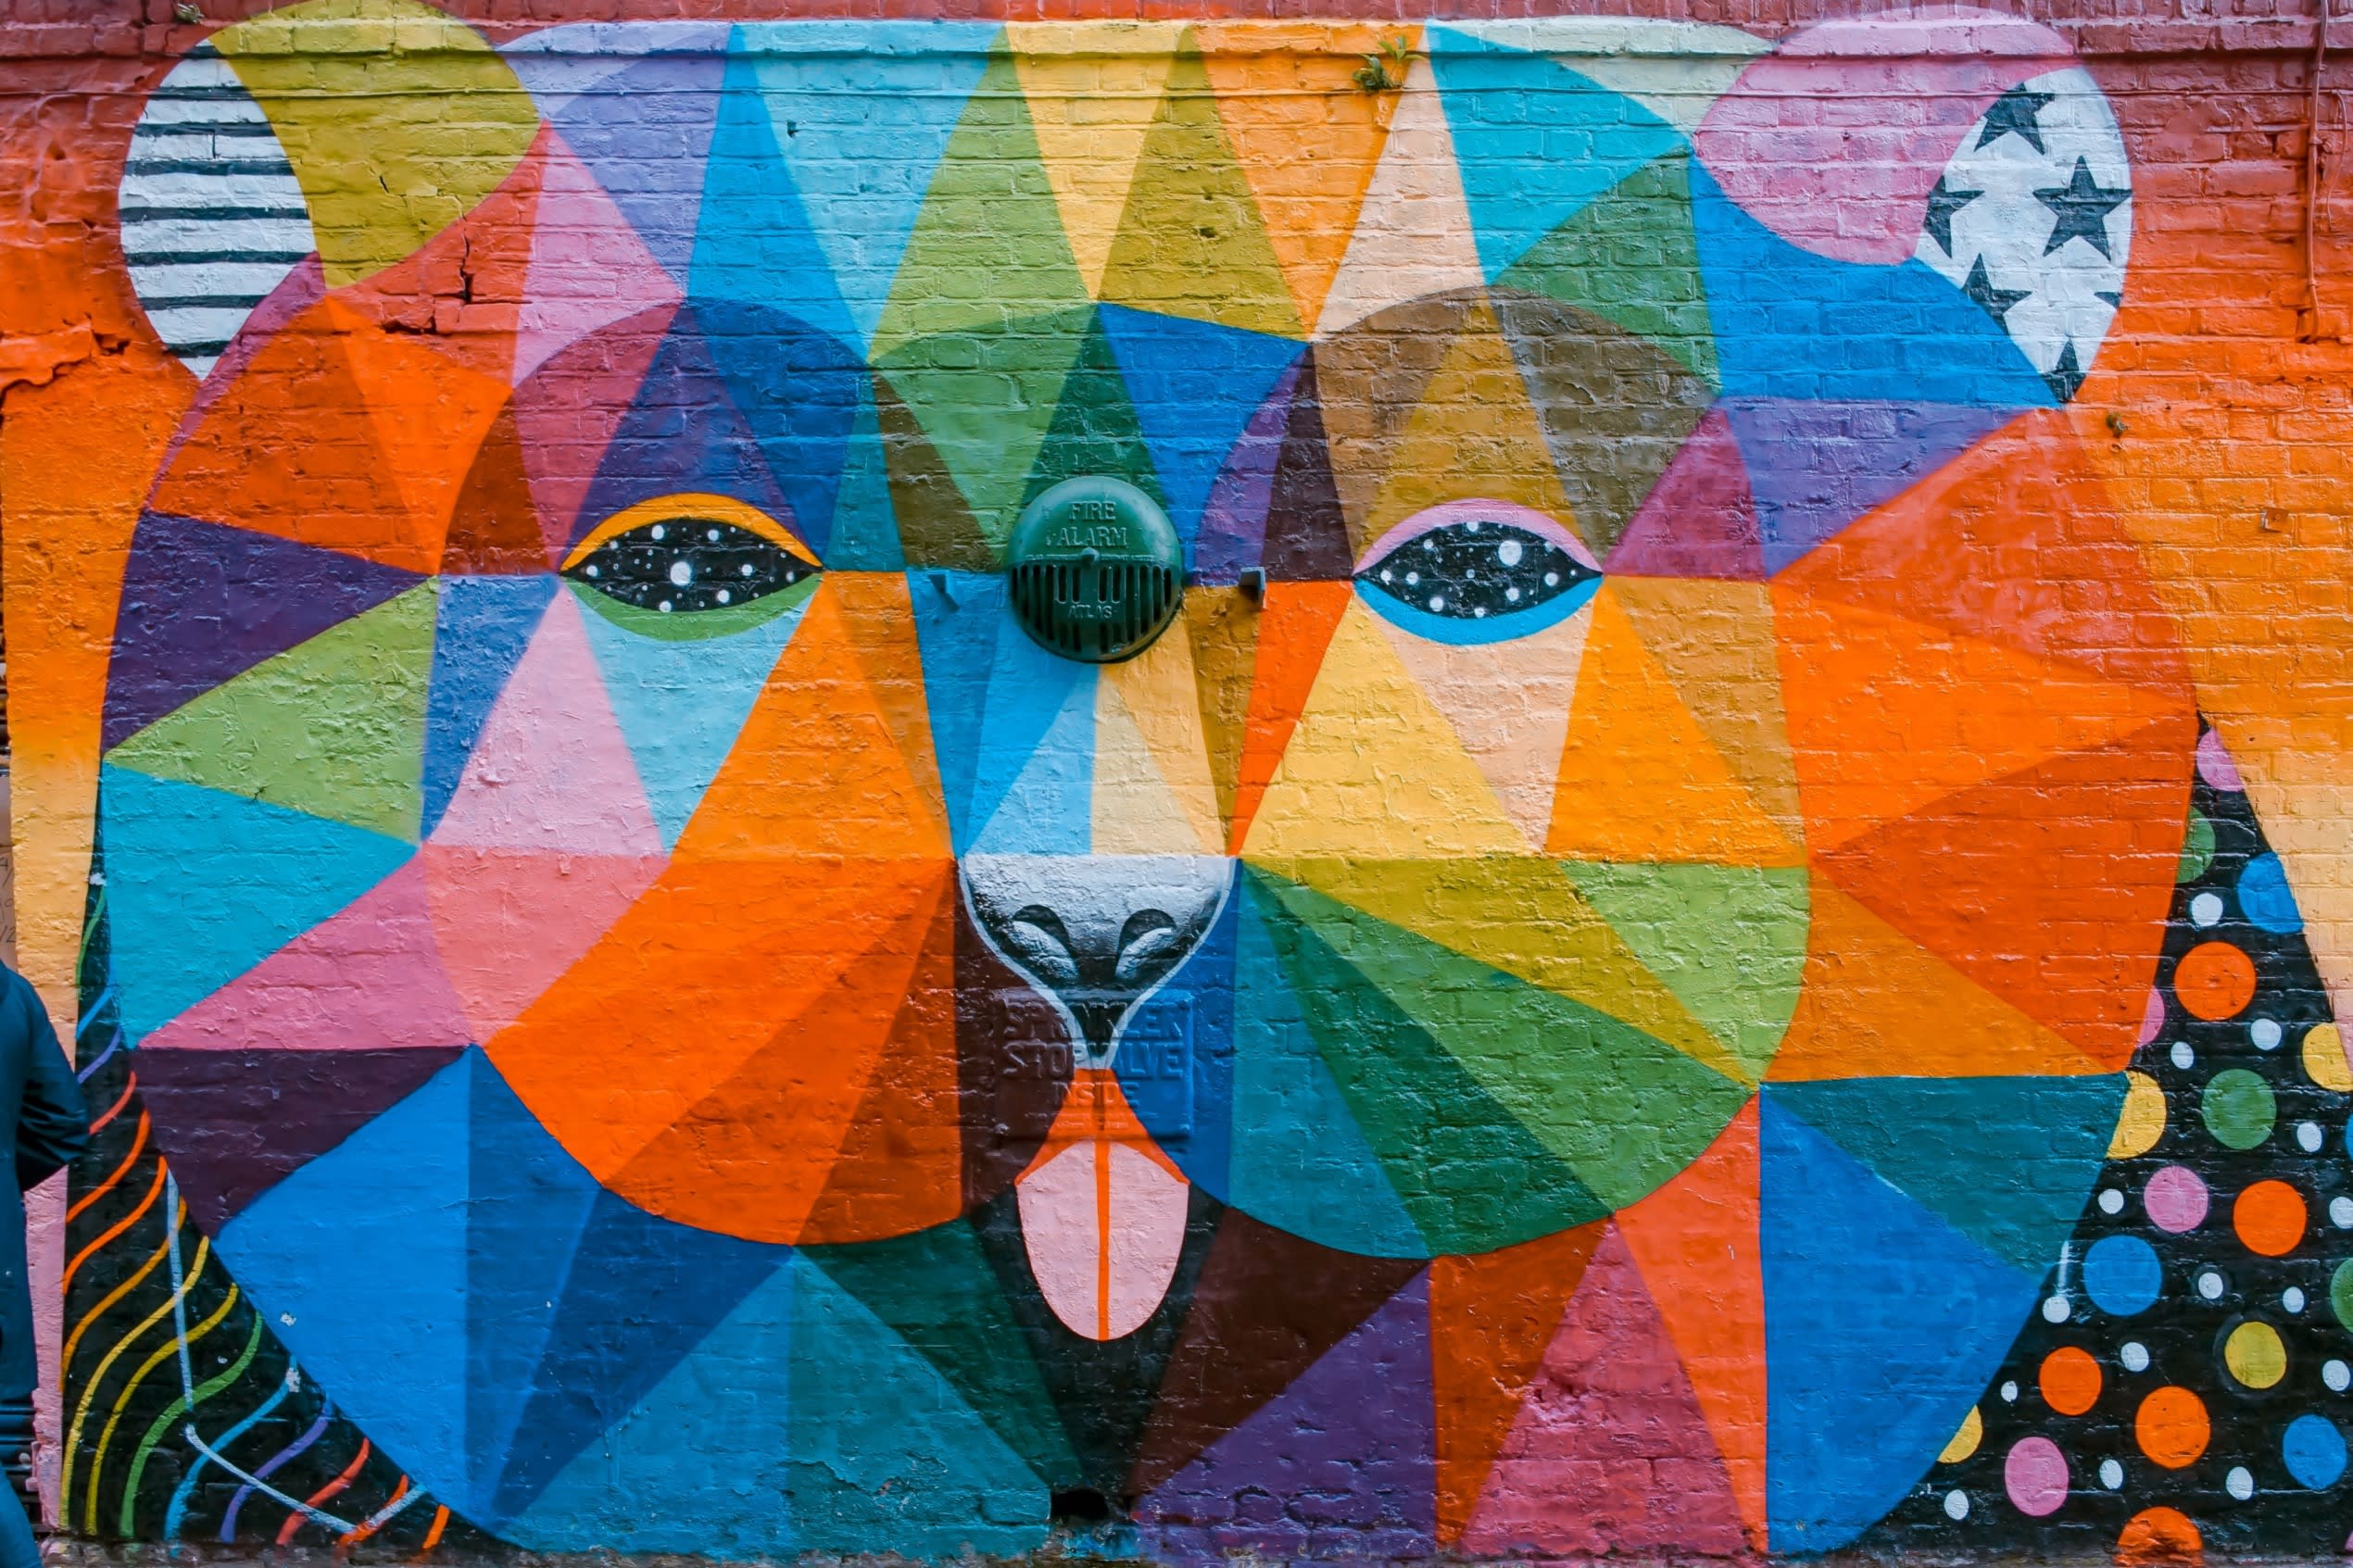 street art in Shoreditch which shows a bear that has been comprised of brightly coloured triangles